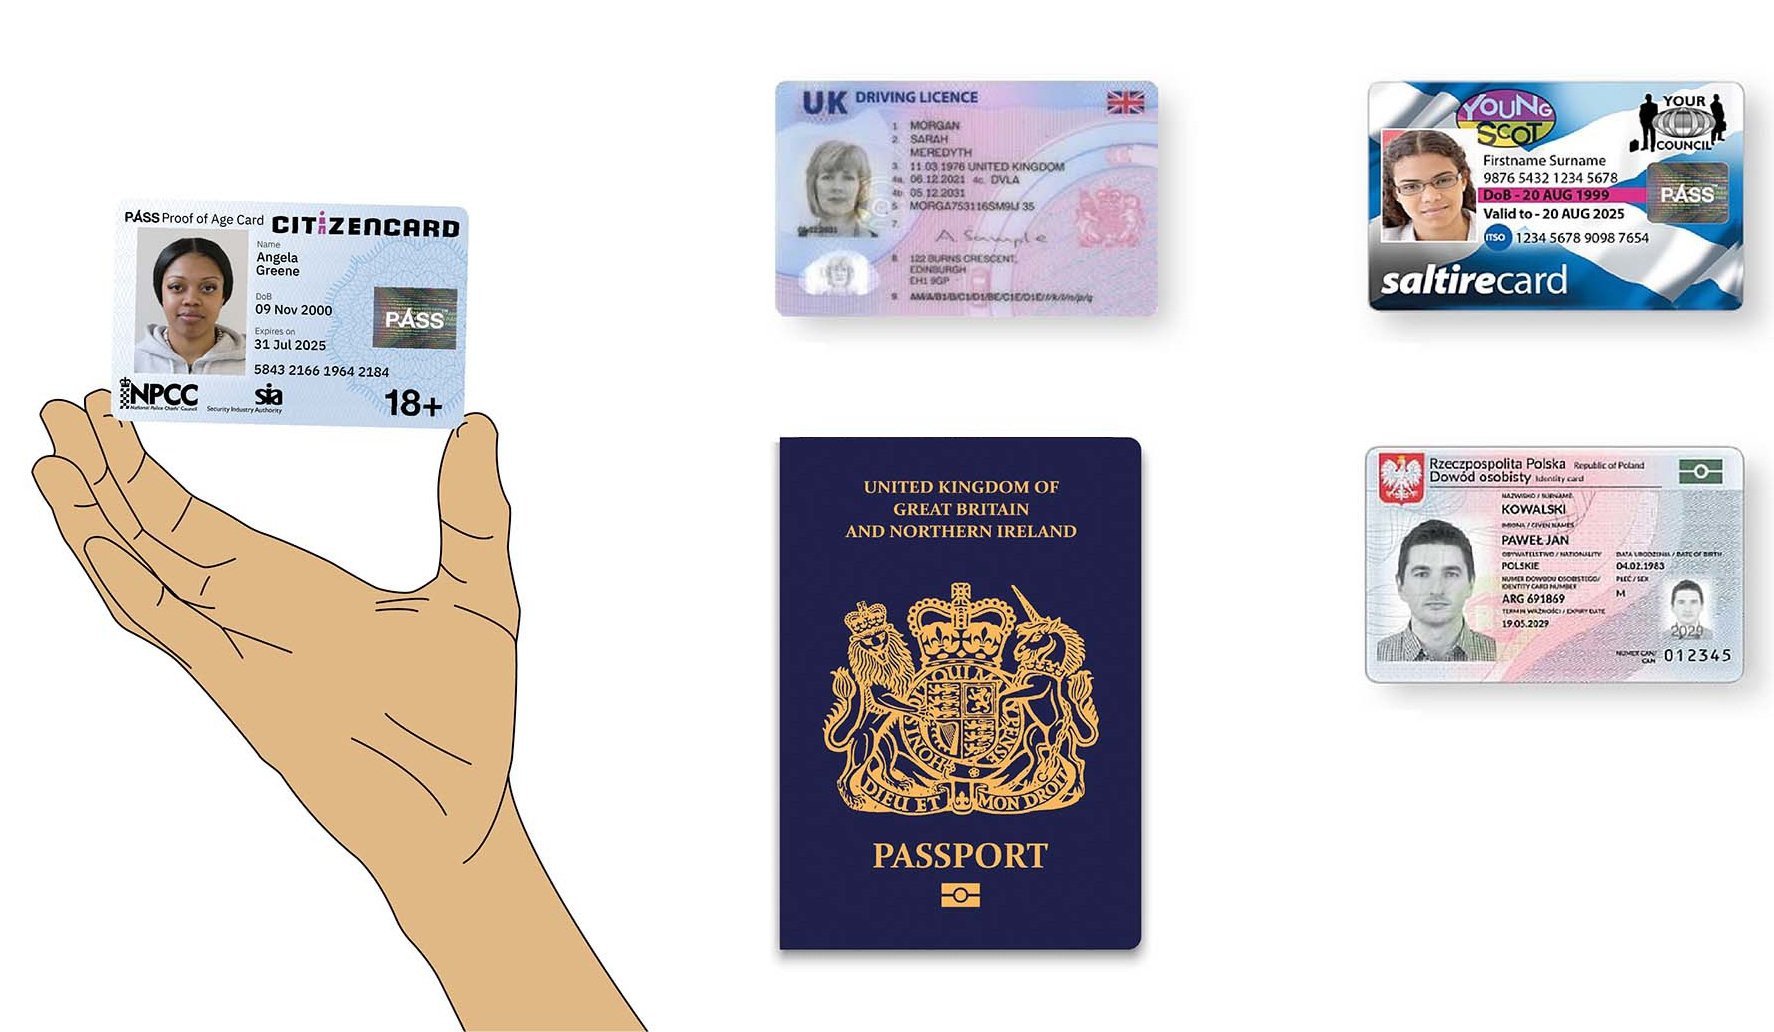 Acceptable forms of ID in the UK